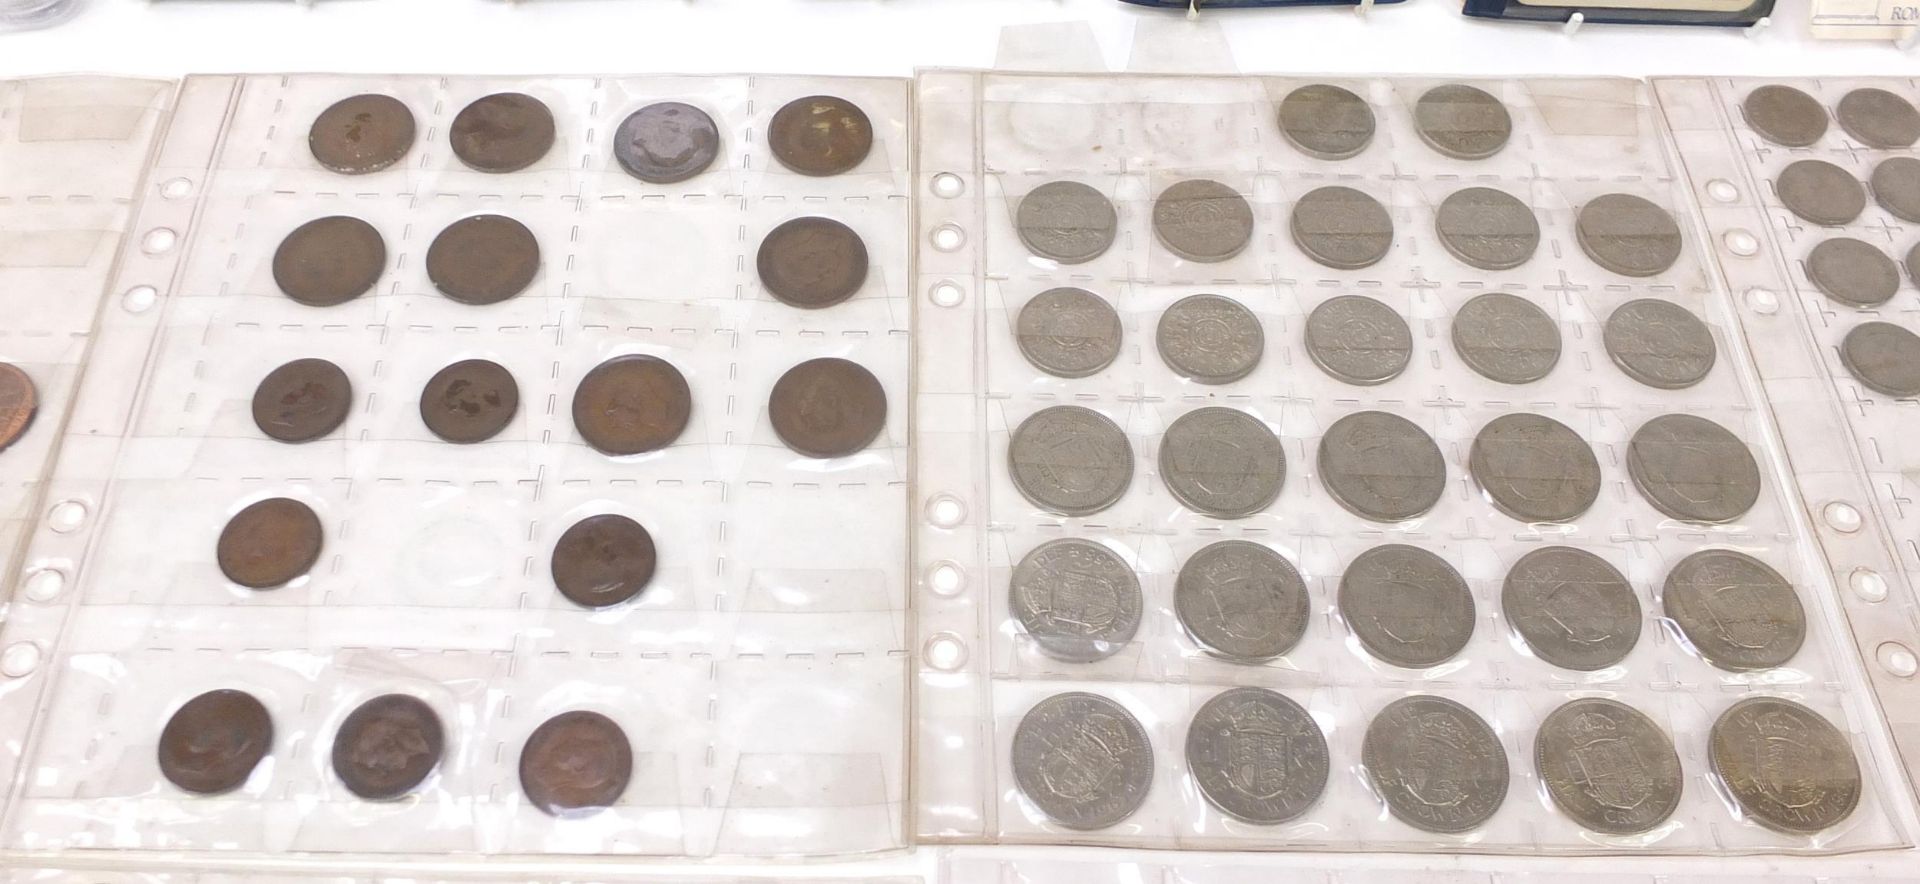 Antique and later British and world coinage including pennies and half crowns - Image 12 of 17